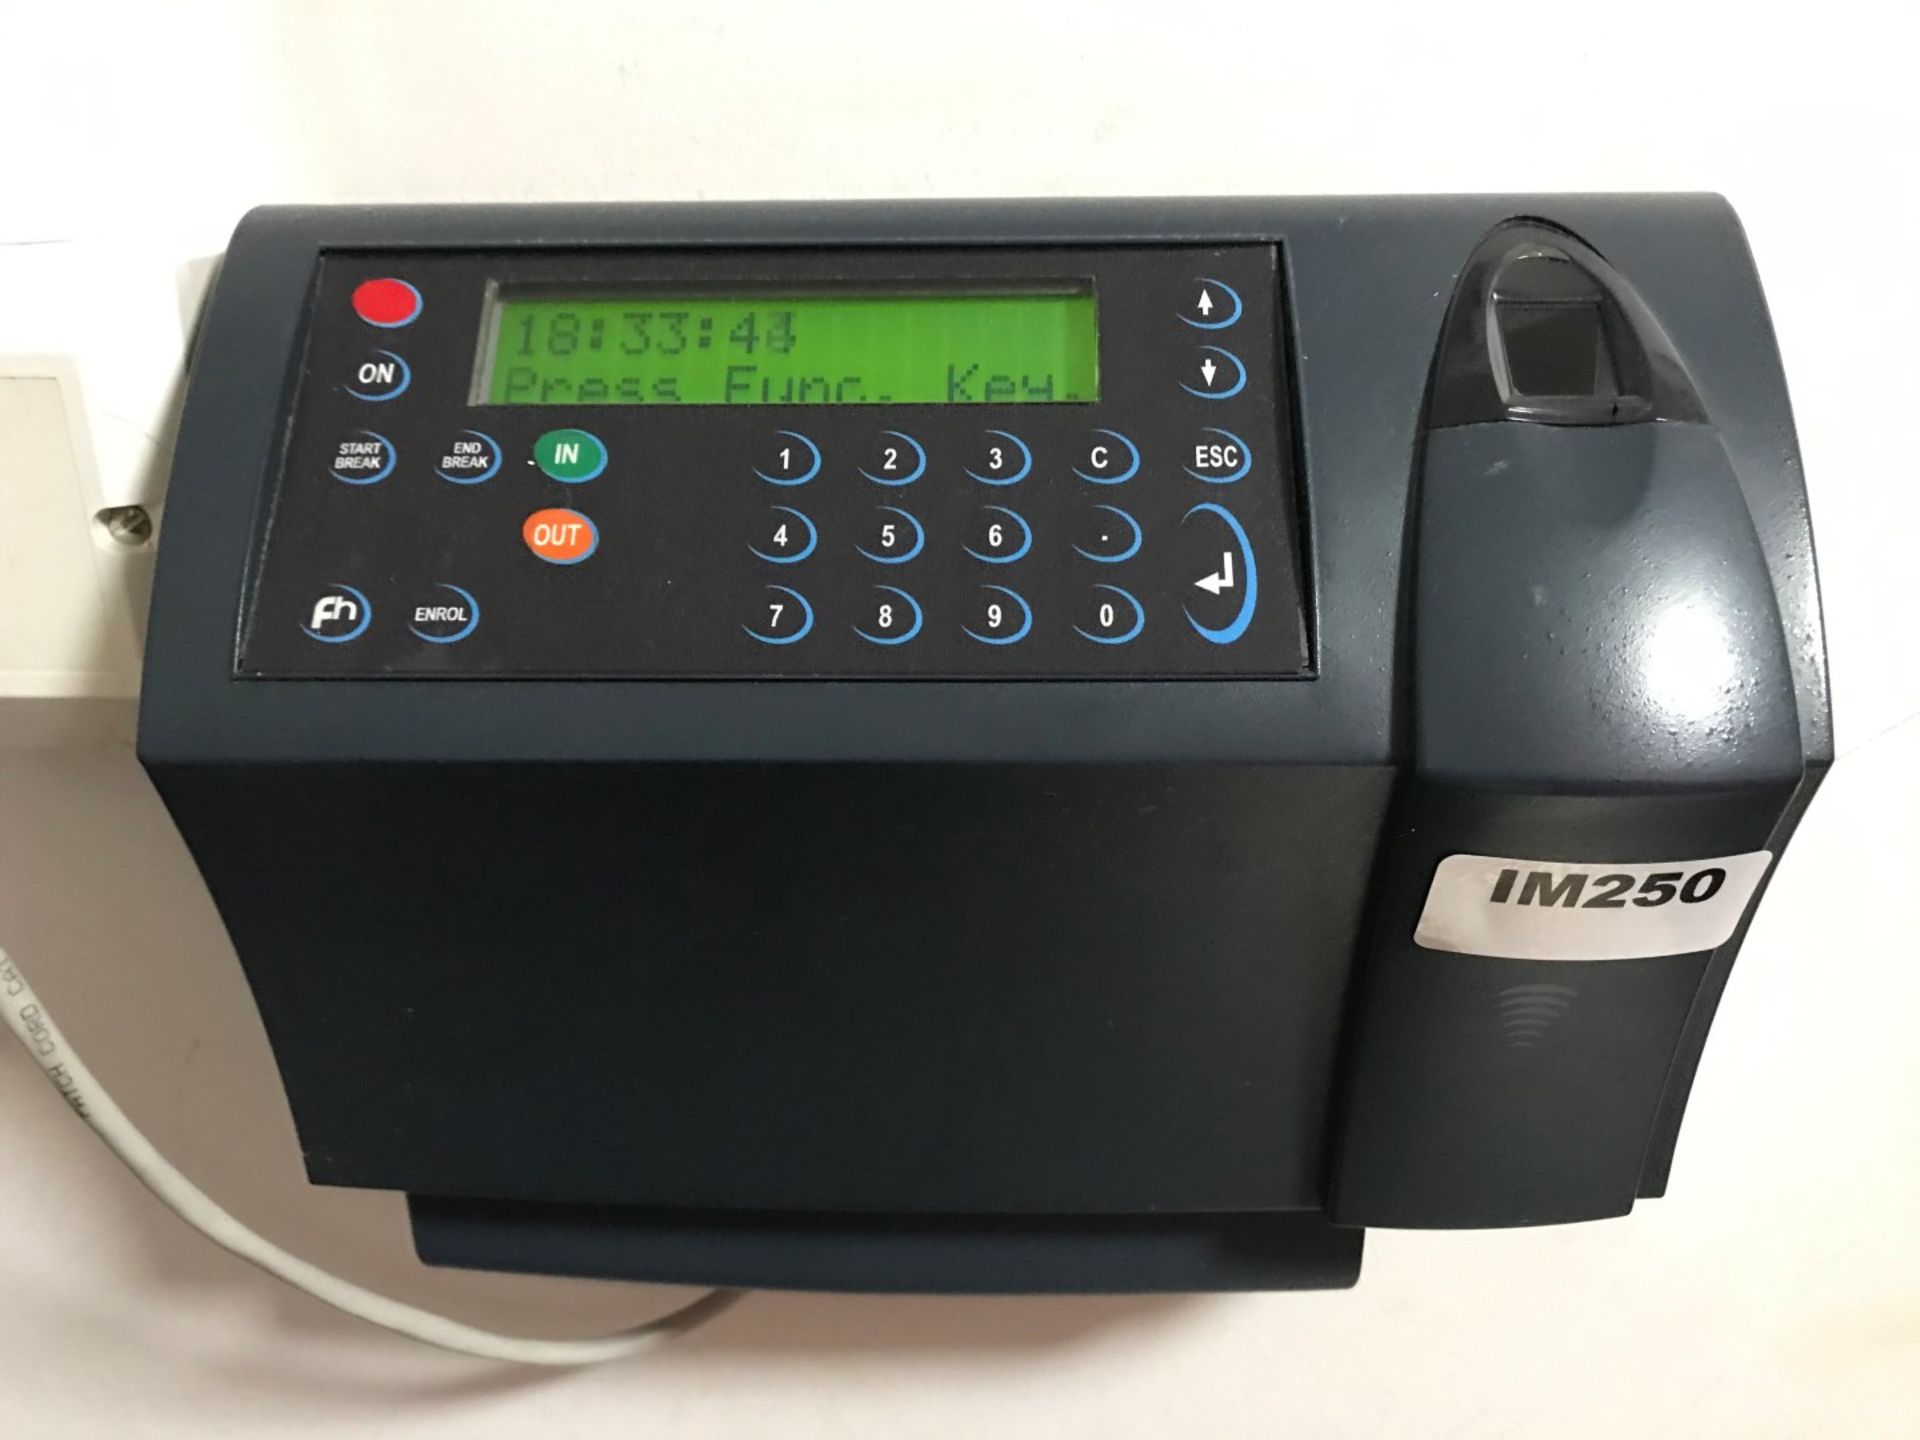 1 x Electronic Clocking In / Out Machine - CL554 - Ref IM250 - Location: London E1